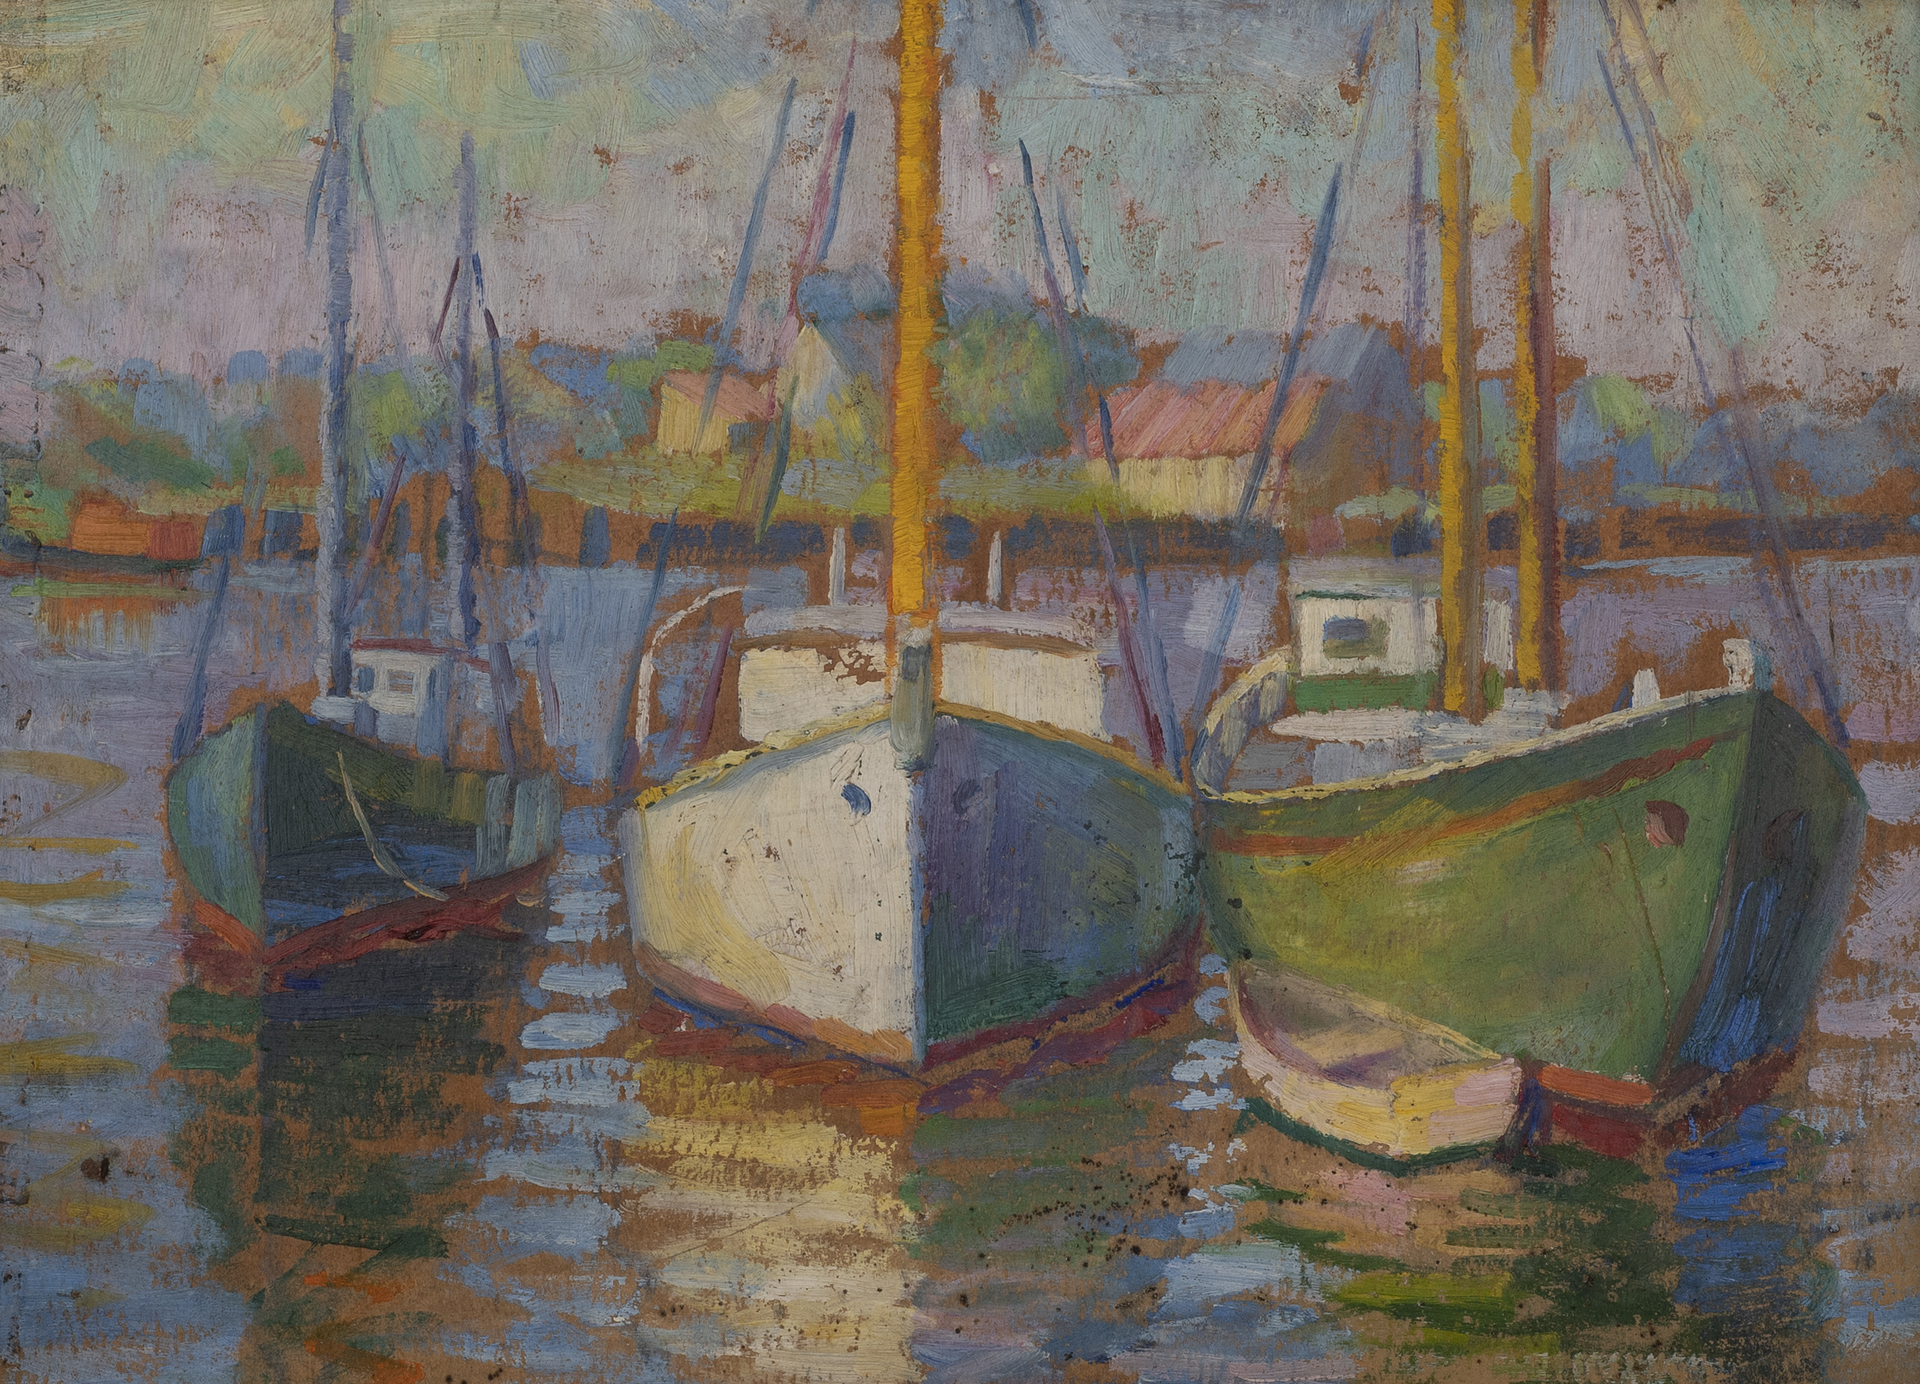 Untitled Boats by Josephine Couper